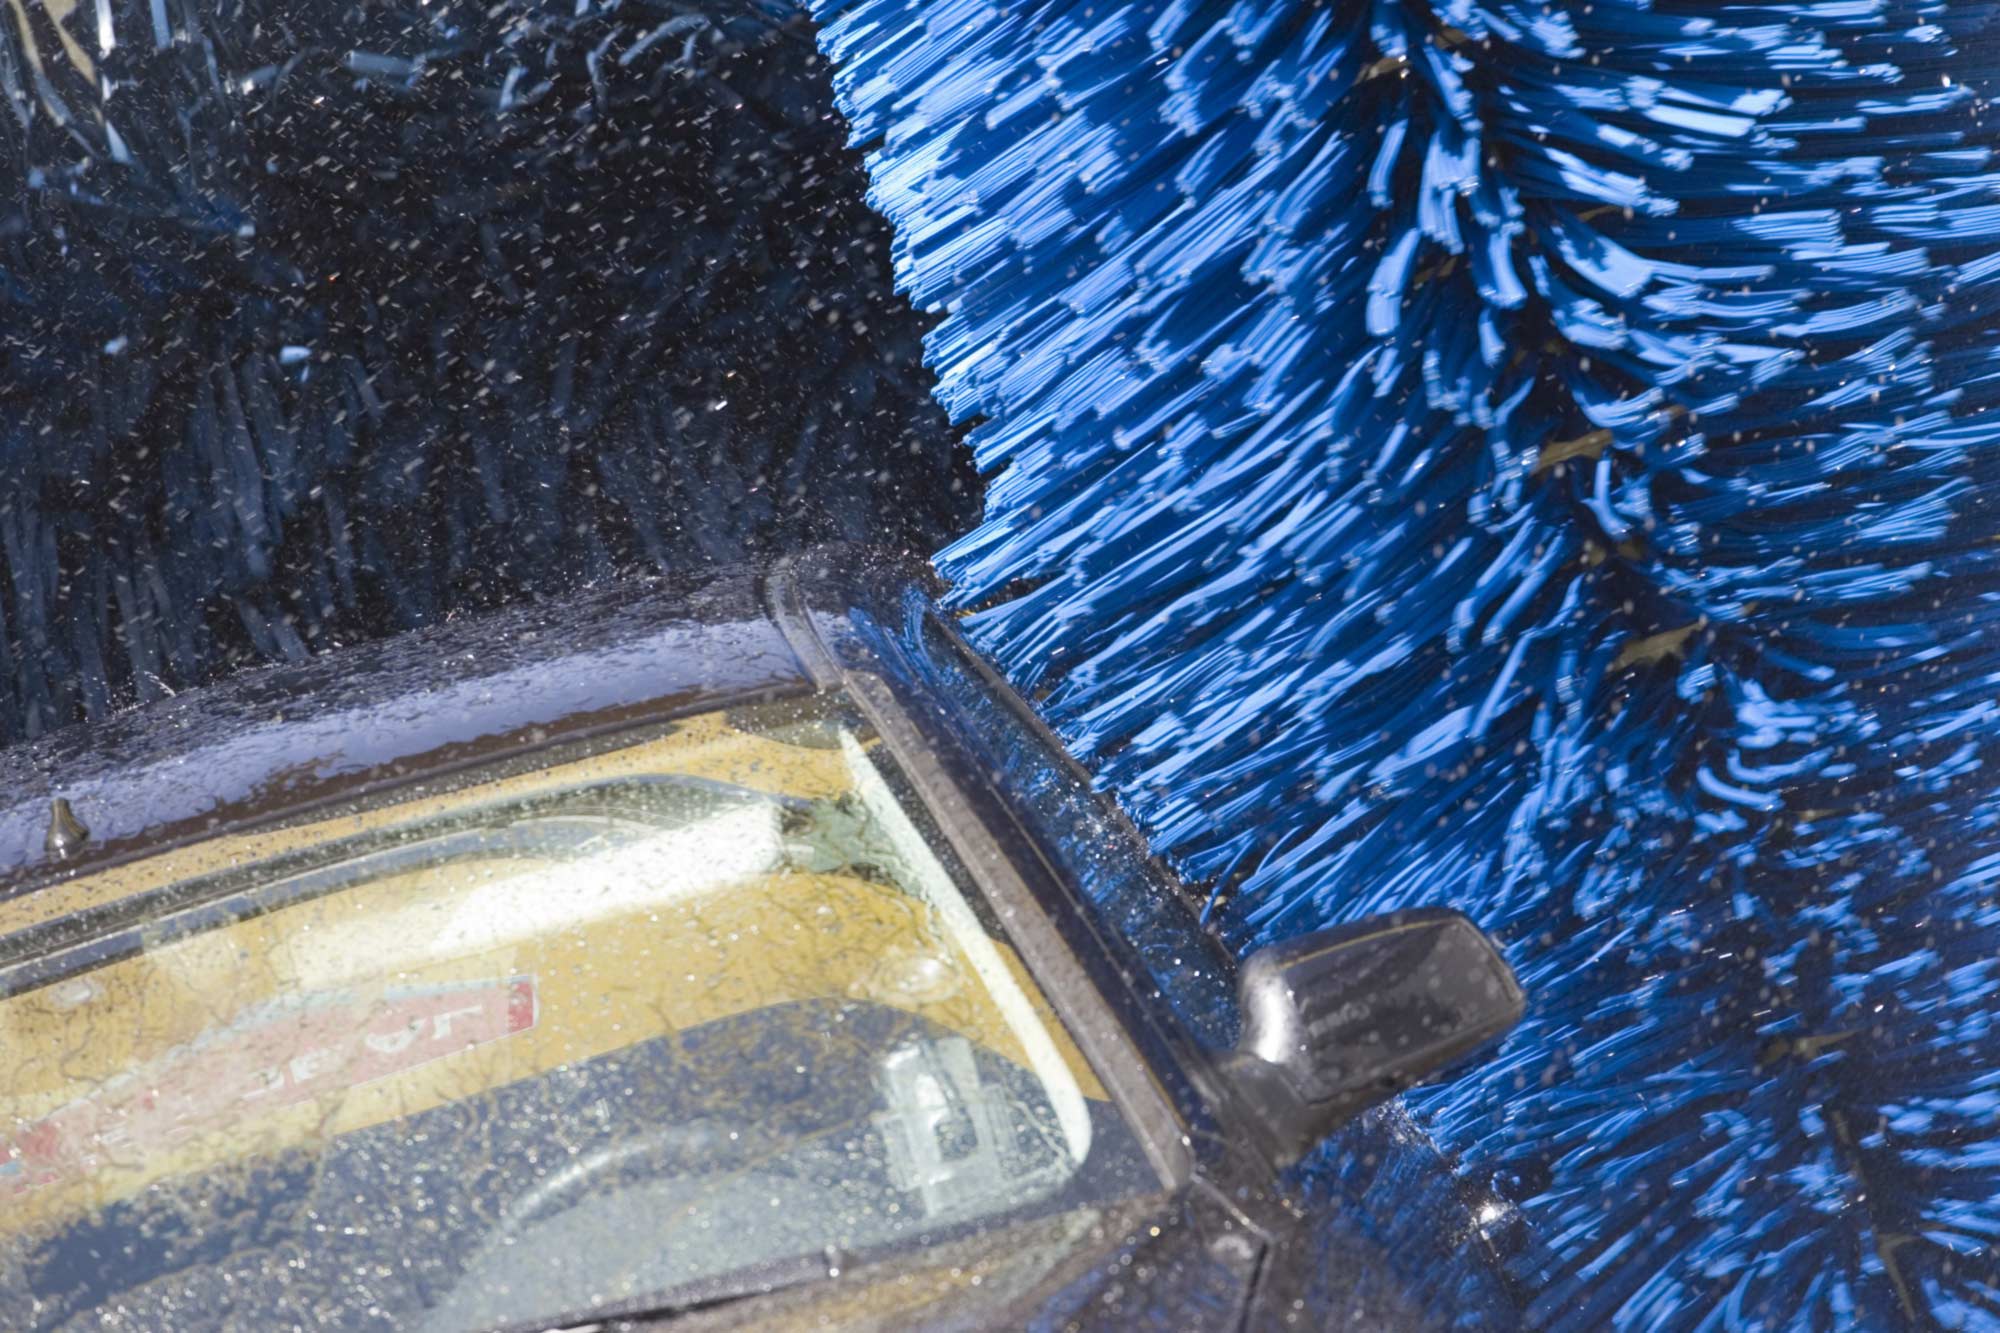 A car is going through an automatic car wash with blue brushes cleaning its surface.